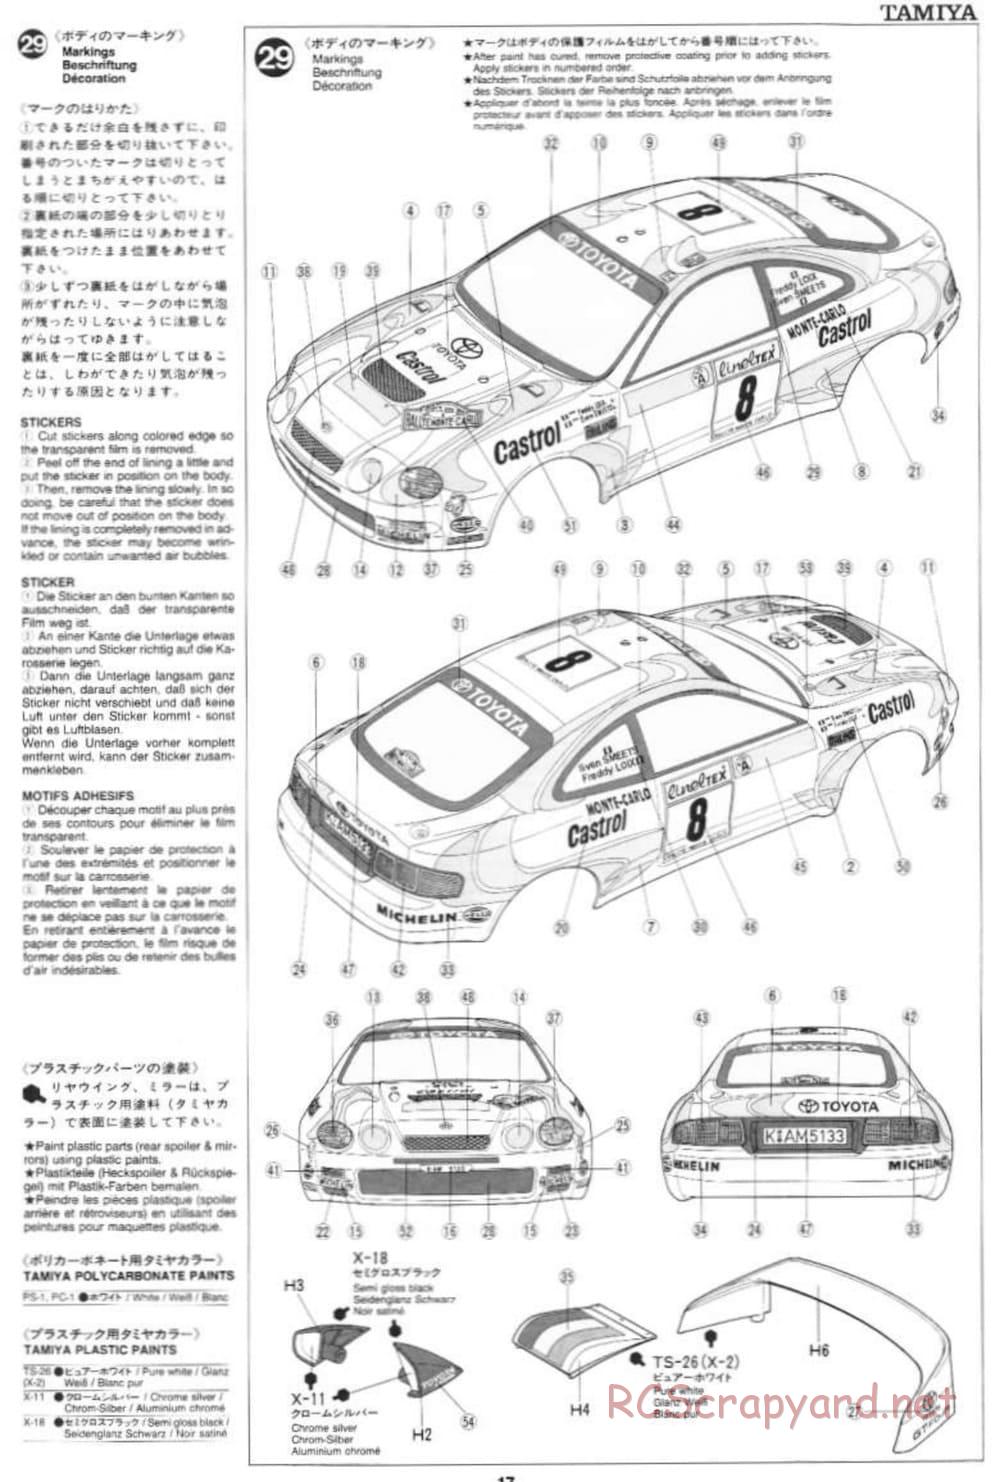 Tamiya - Toyota Celica GT-Four 97 Monte Carlo - TL-01 Chassis - Manual - Page 17